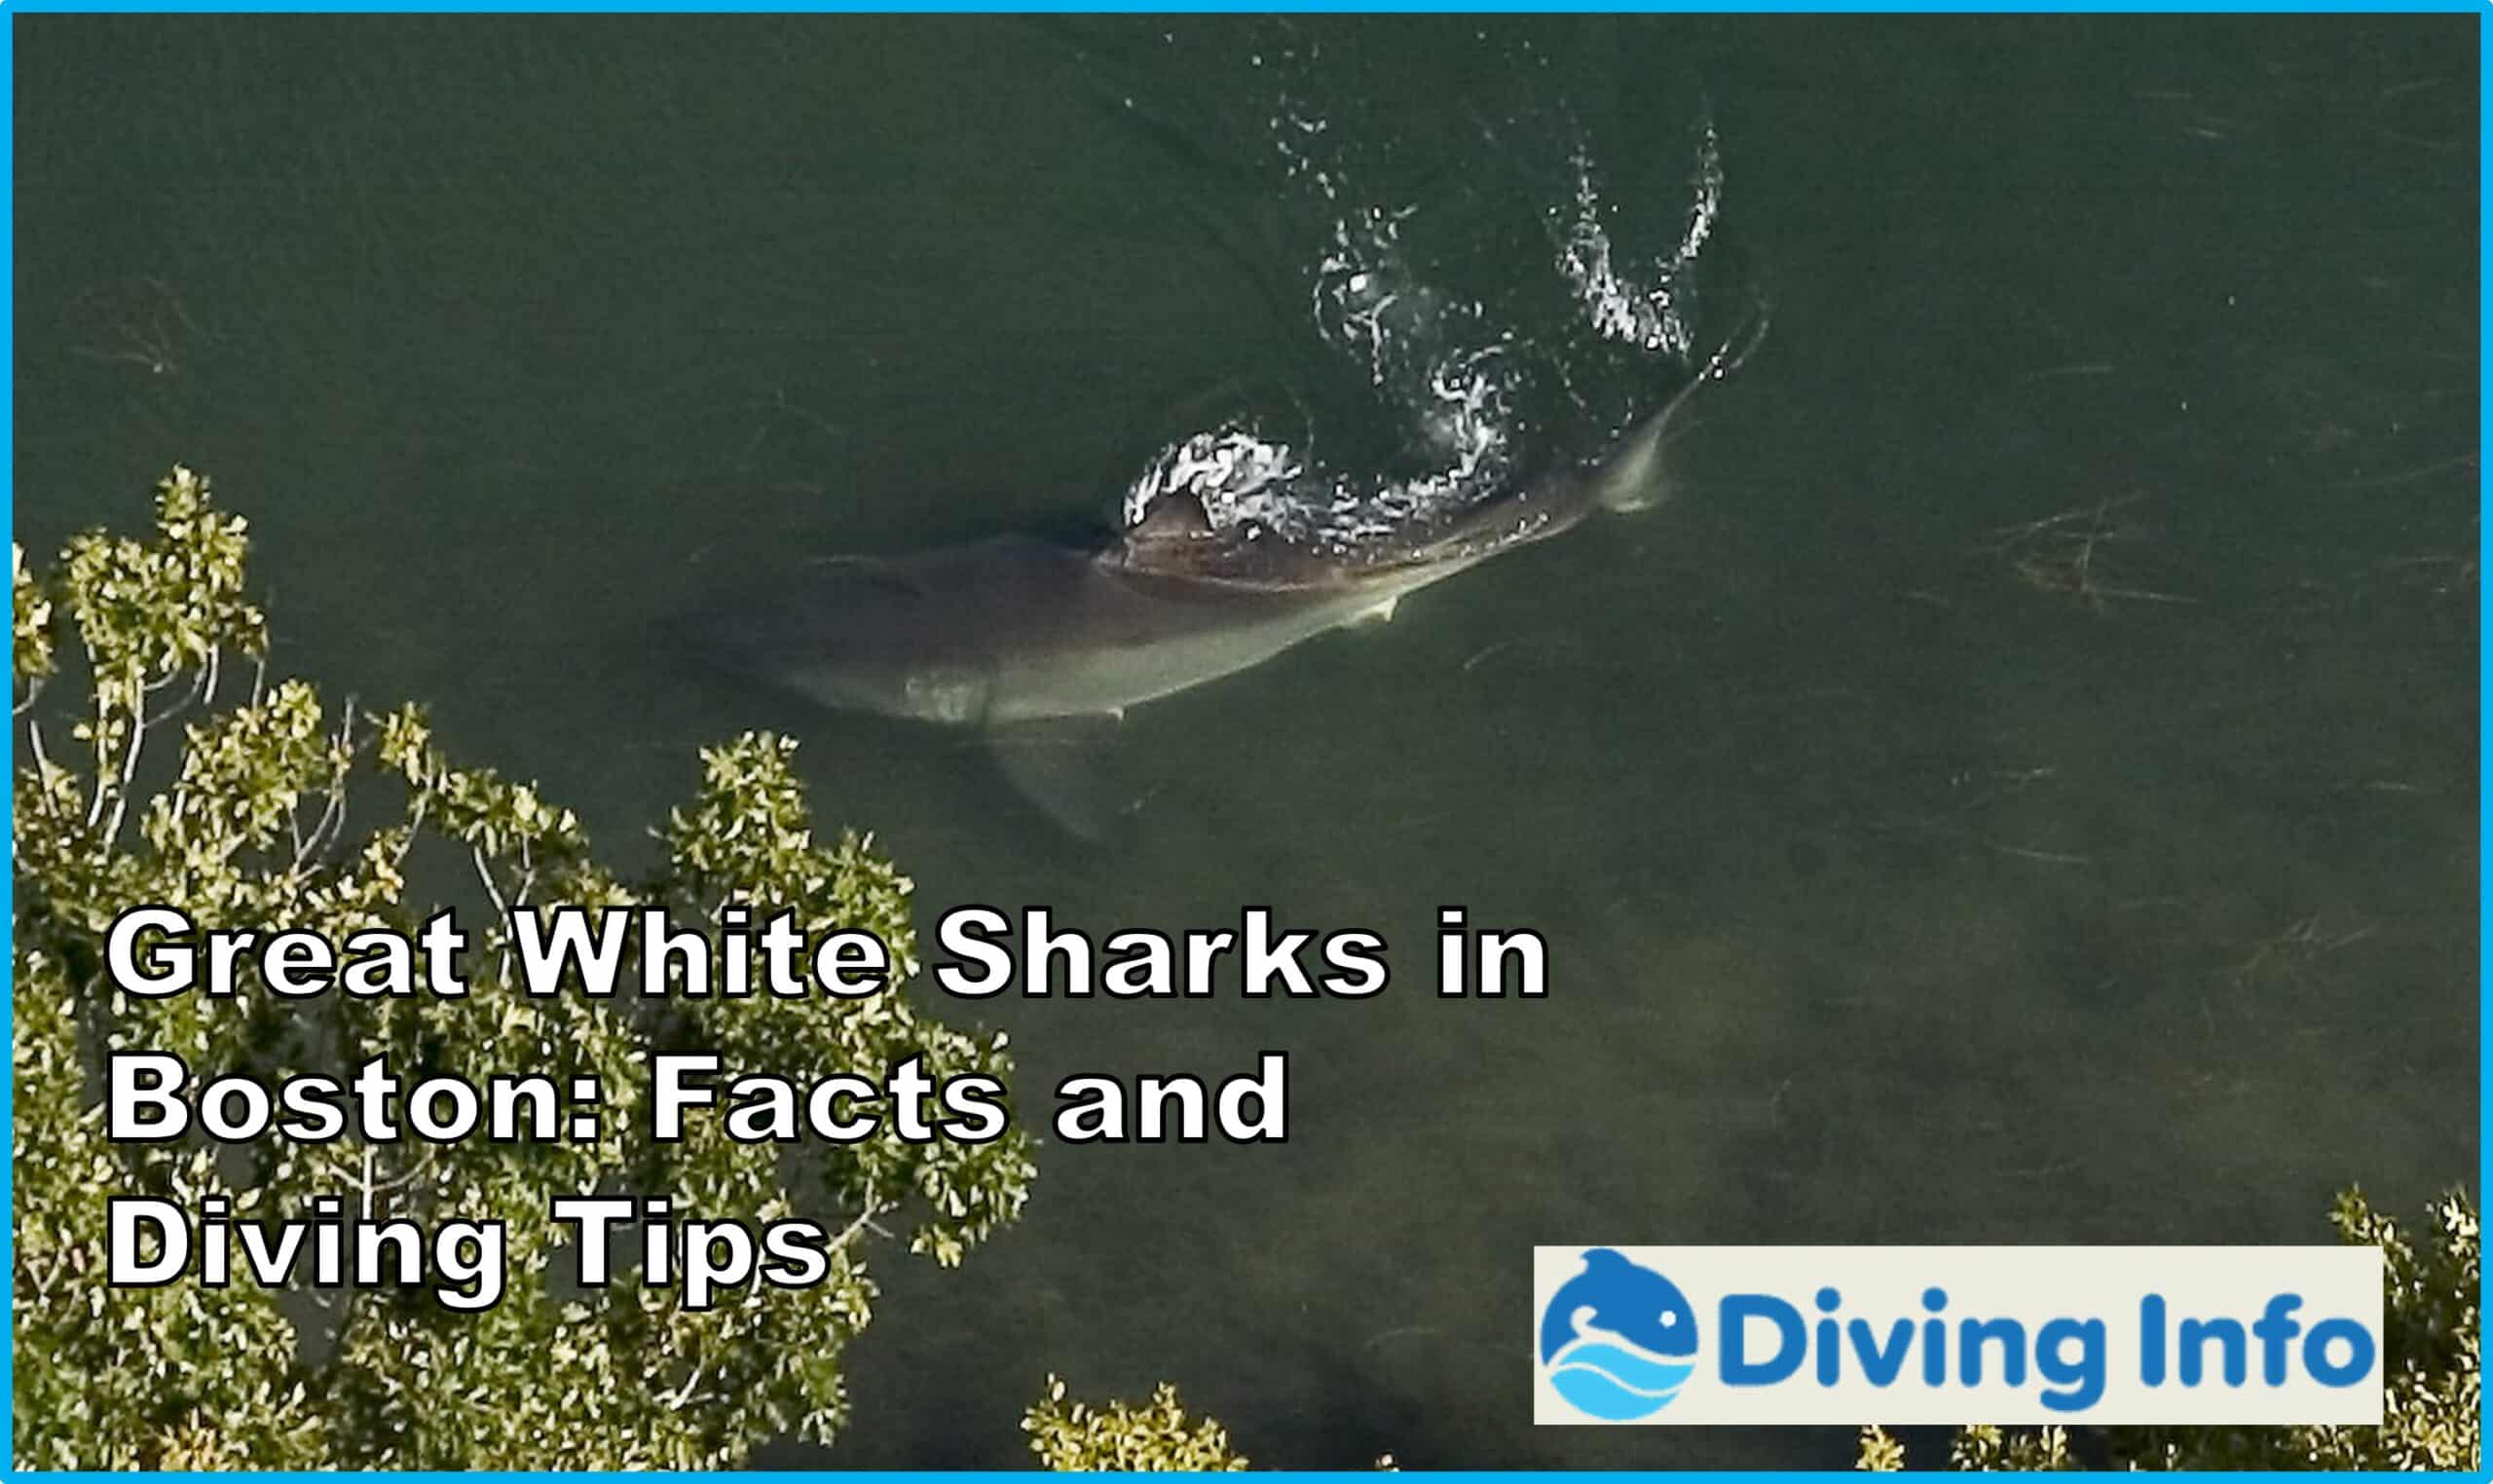 Great White Sharks in Boston: Facts and Diving Tips